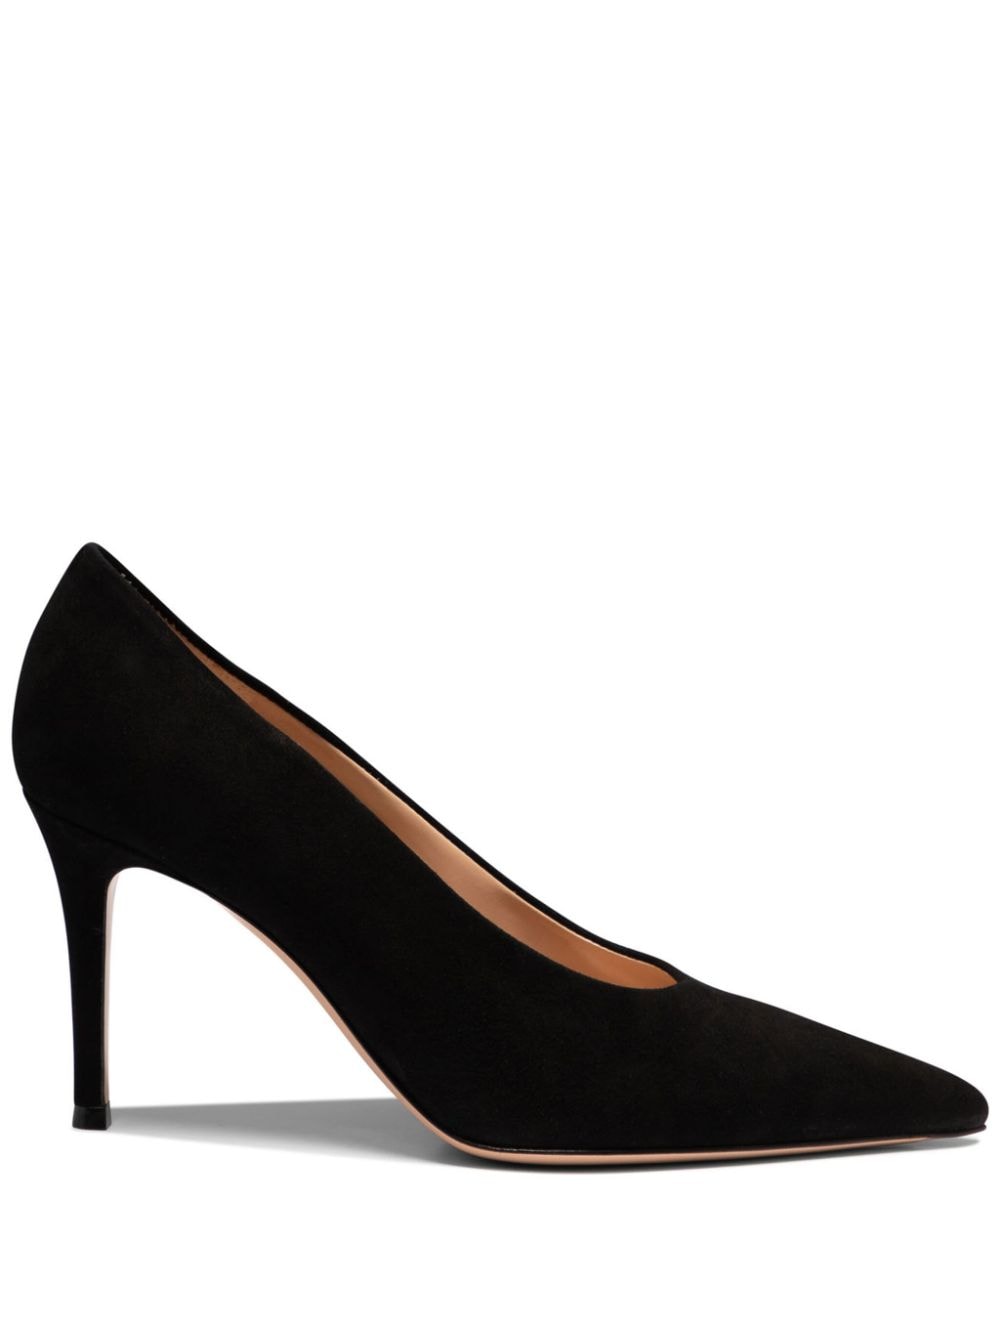 Gianvito Rossi 85mm pointed-toe suede pumps Black